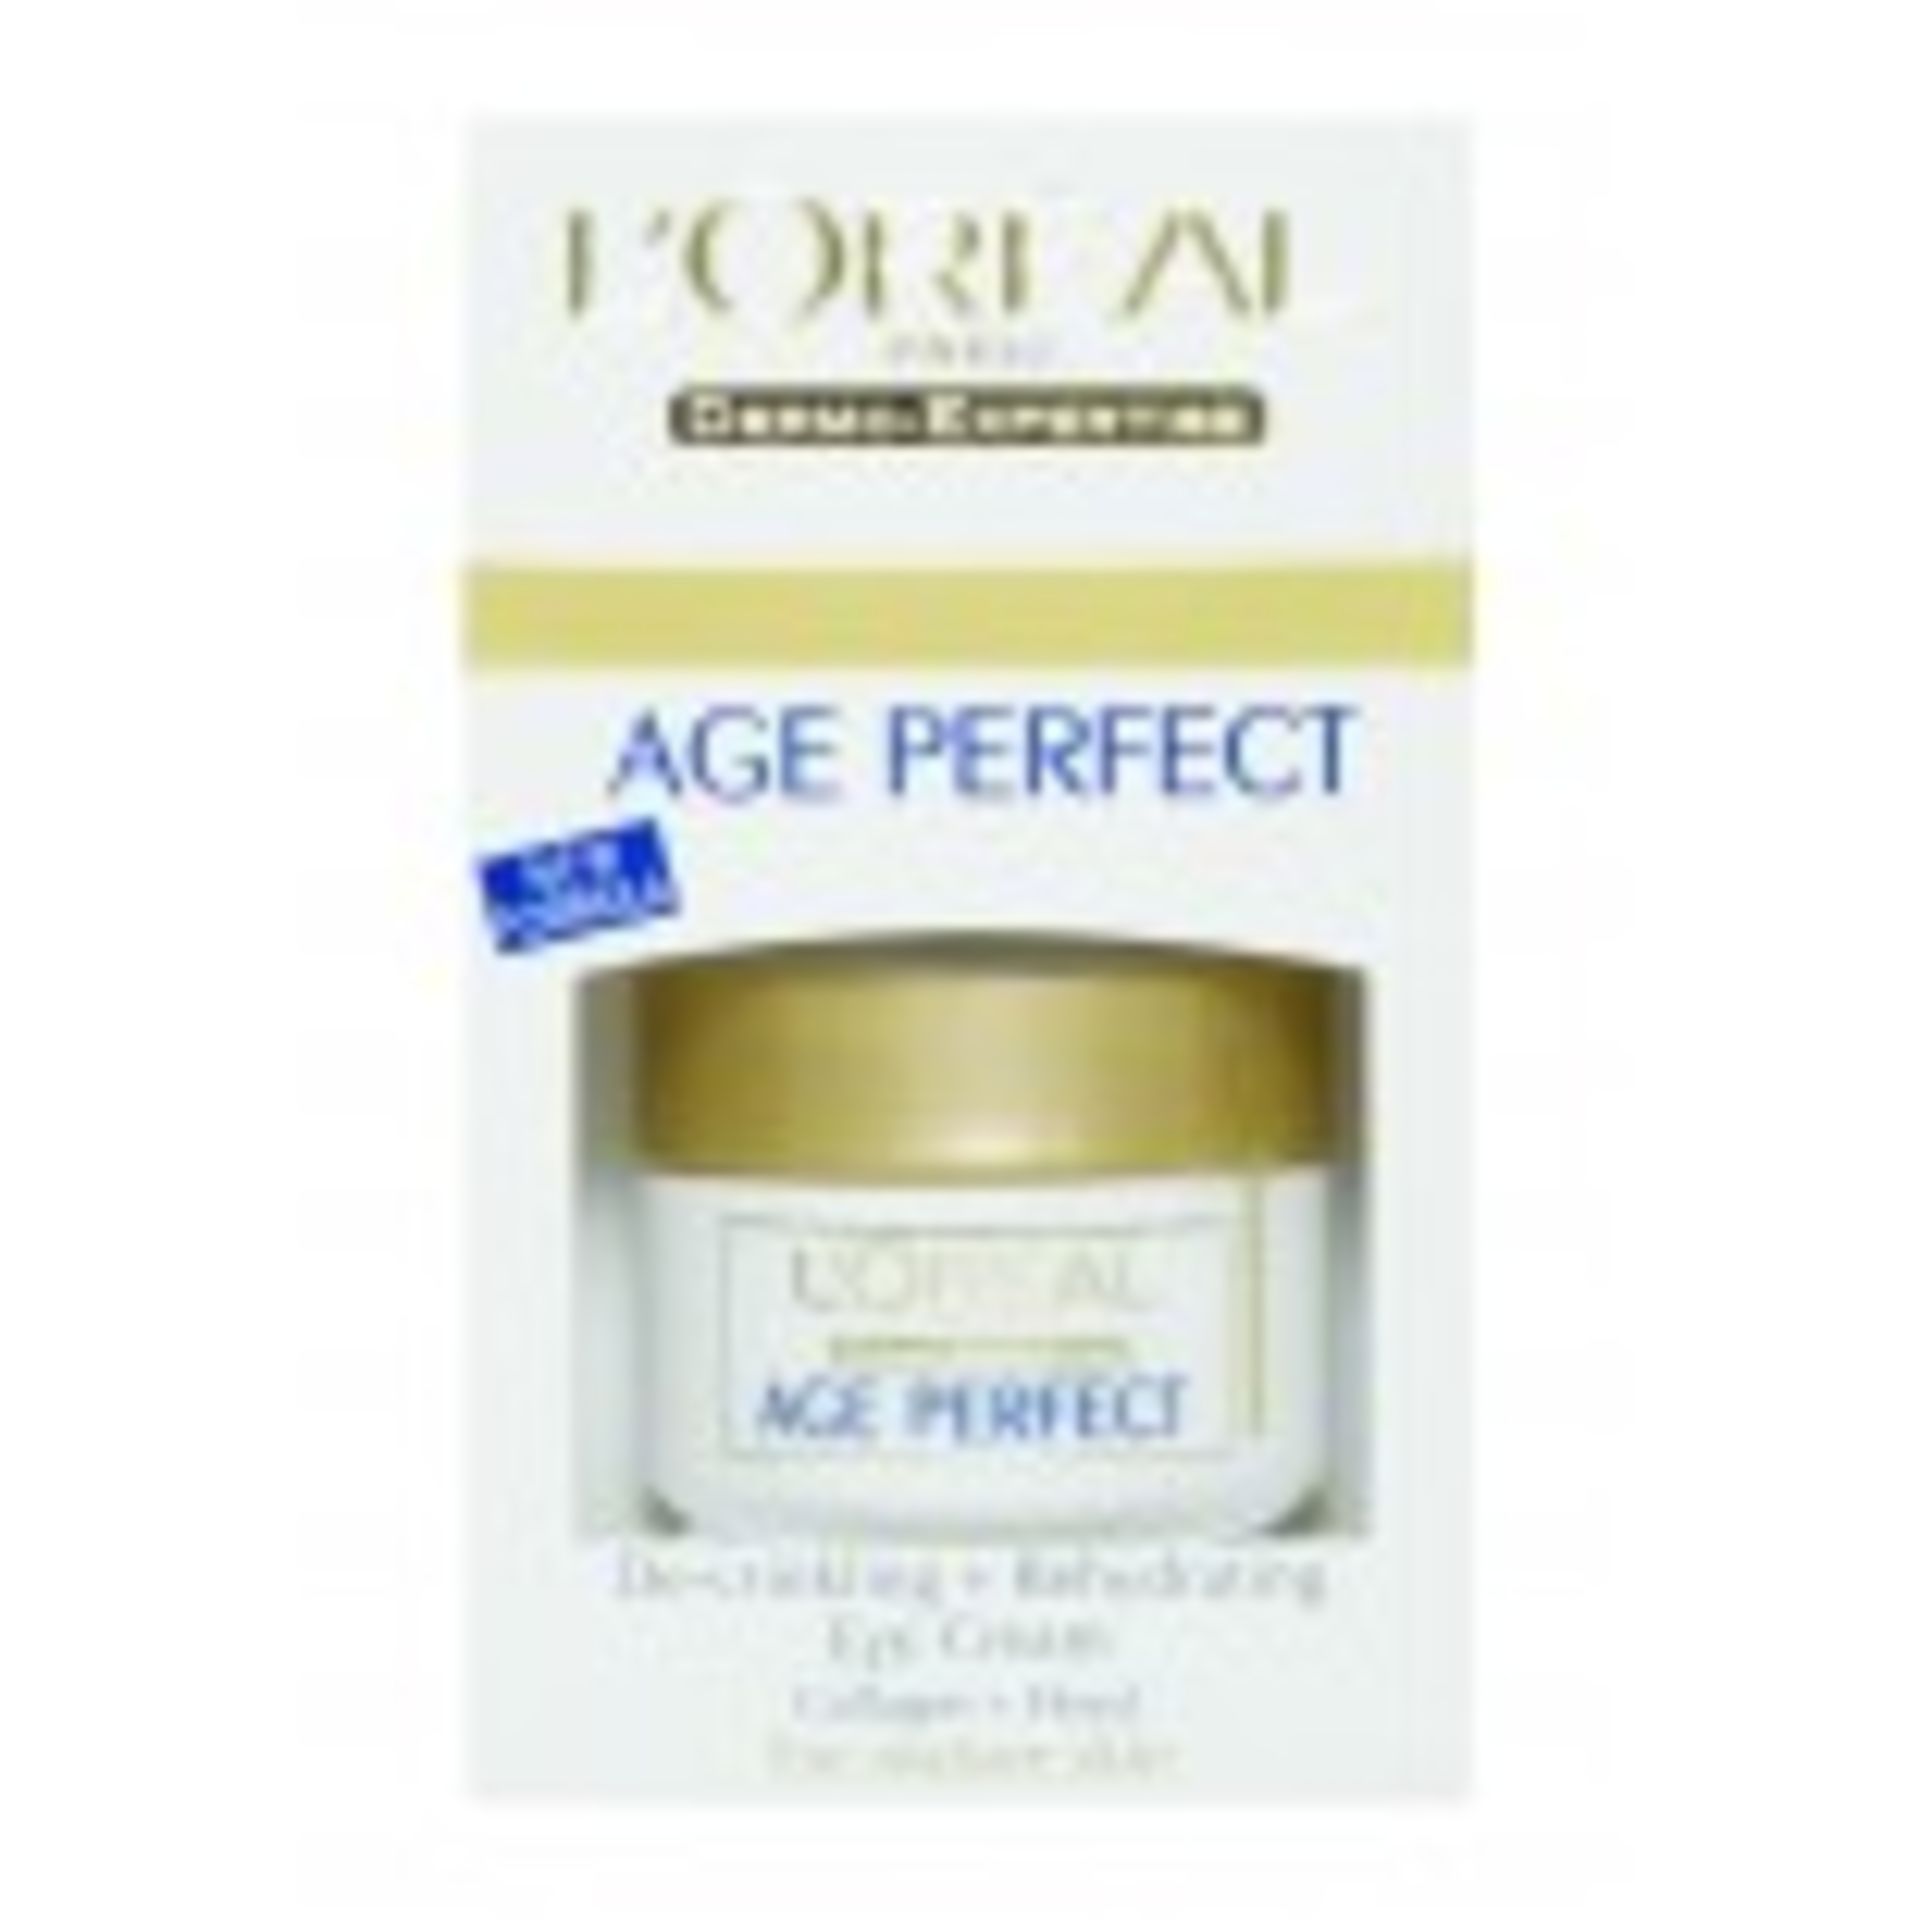 V L'Oreal Dermo-Expertise Age Perfect Eye cream mature skin - Image 4 of 4